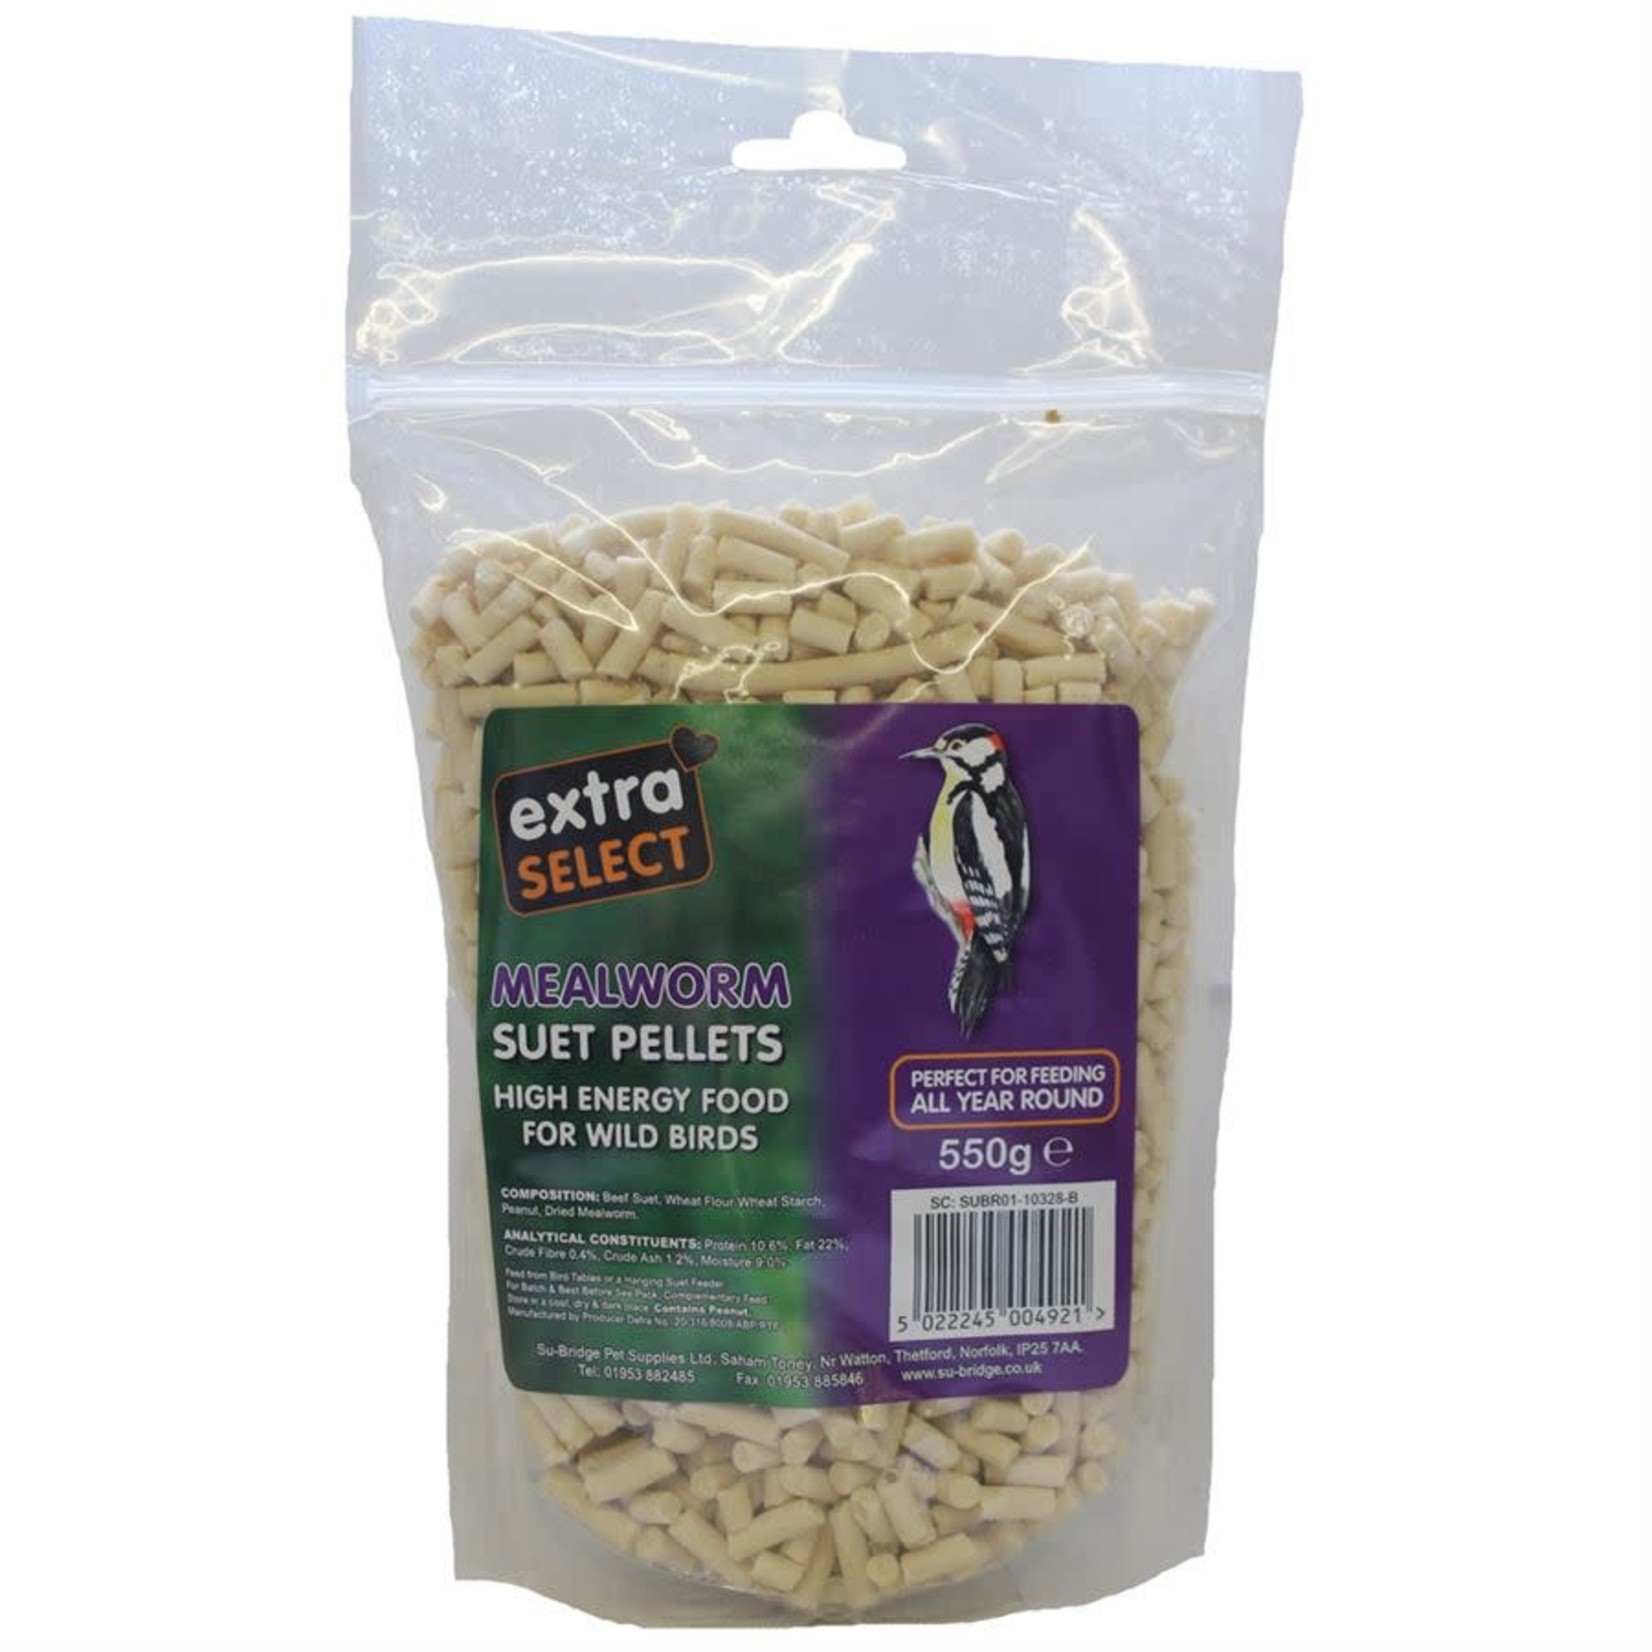 Extra Select High Energy Wild Bird Suet Pellets with Mealworm 550g